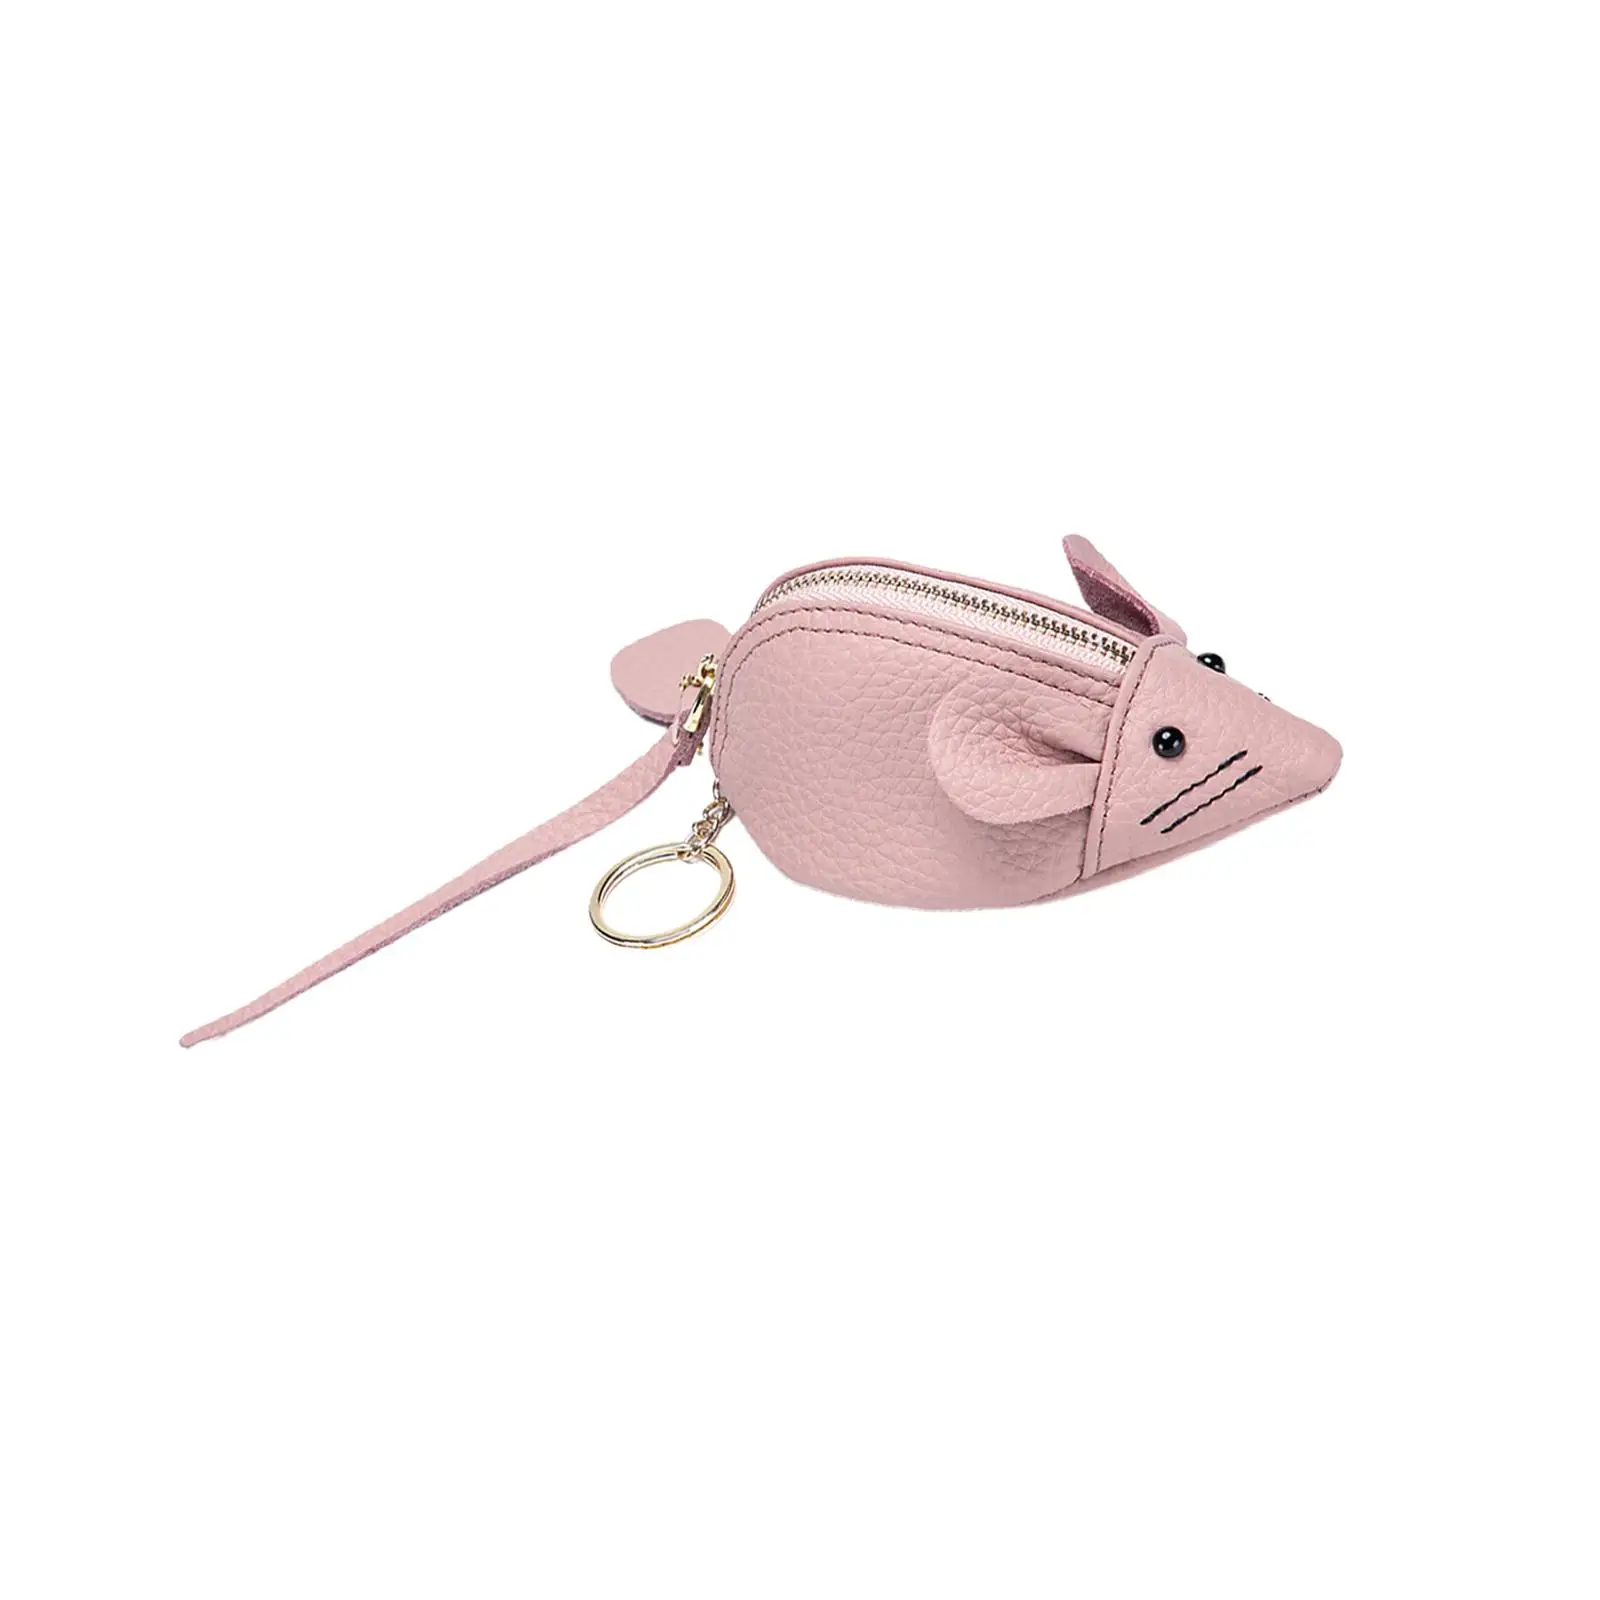 Cute Animal Purse Pendant Fashion Casual Earphone Storage Case Key Case Small Bag for Outdoor Cycling Headset Storage Travel